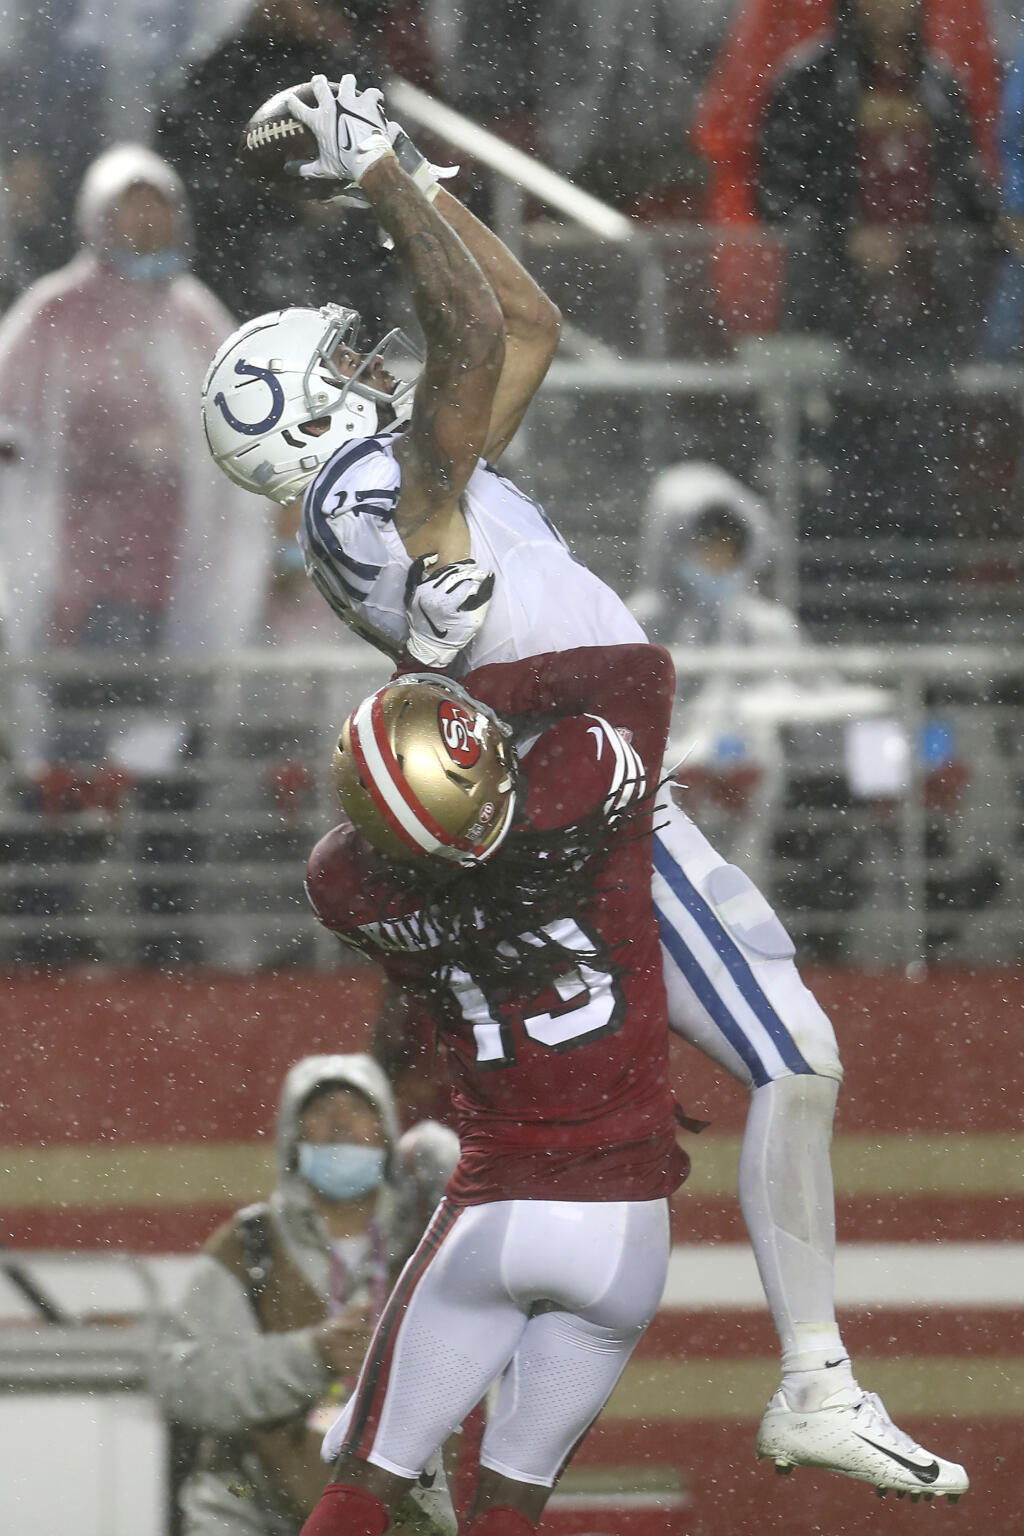 Indianapolis Colts wide receiver Michael Pittman Jr., top, catches a touchdown pass over San Francisco 49ers cornerback Dre Kirkpatrick (13) during the second half of an NFL football game in Santa Clara, Calif., Sunday, Oct. 24, 2021. (AP Photo/Jed Jacobsohn)